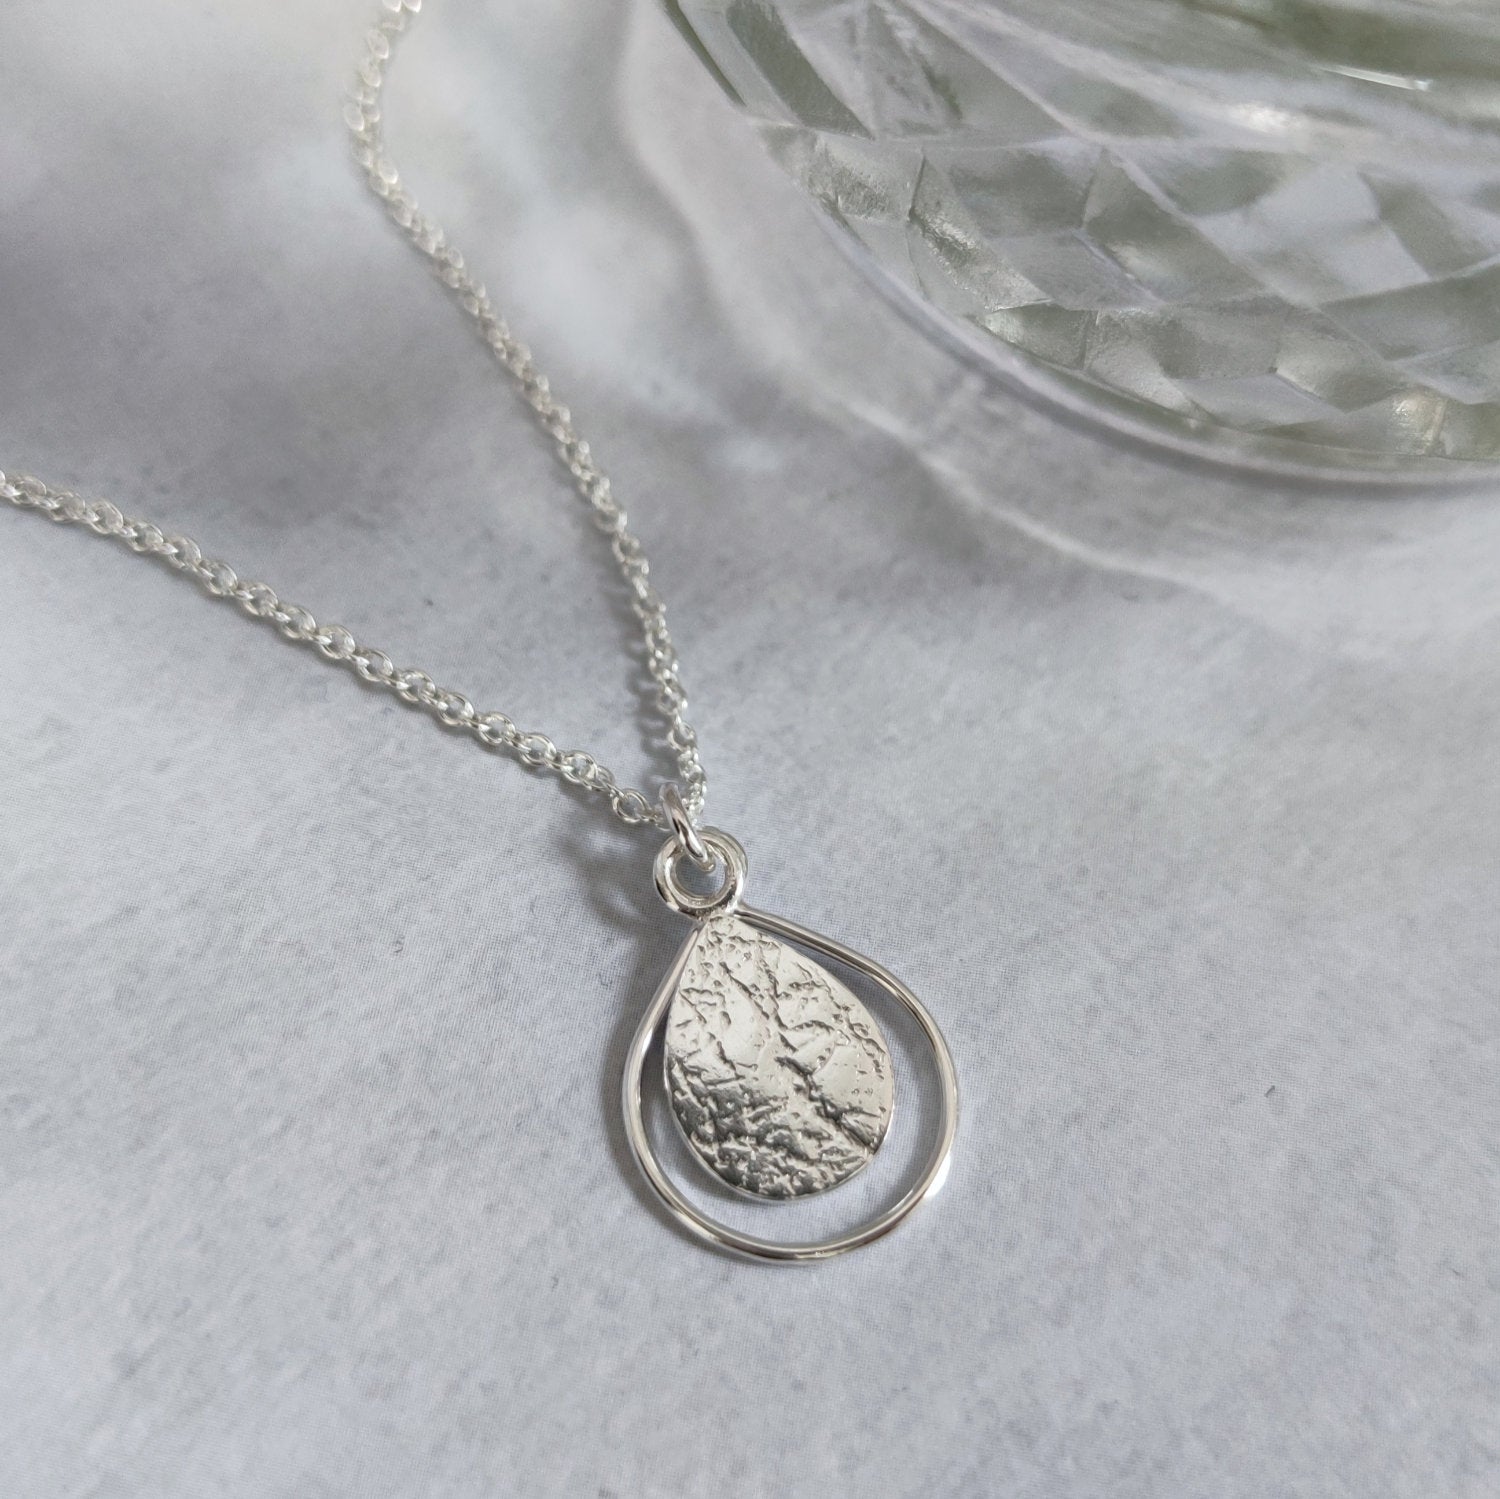 sterling silver dewdrop necklace by aurelium lying on marble surface